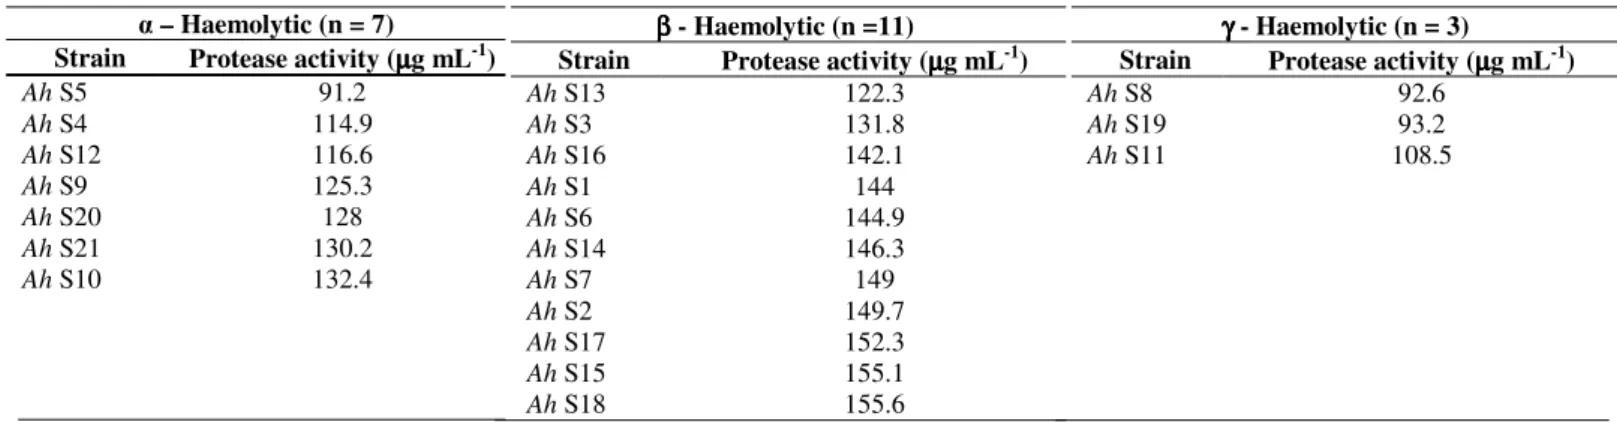 Table 4. Proteolytic activity of A. hydrophila isolates from shrimp samples (n = 21) 